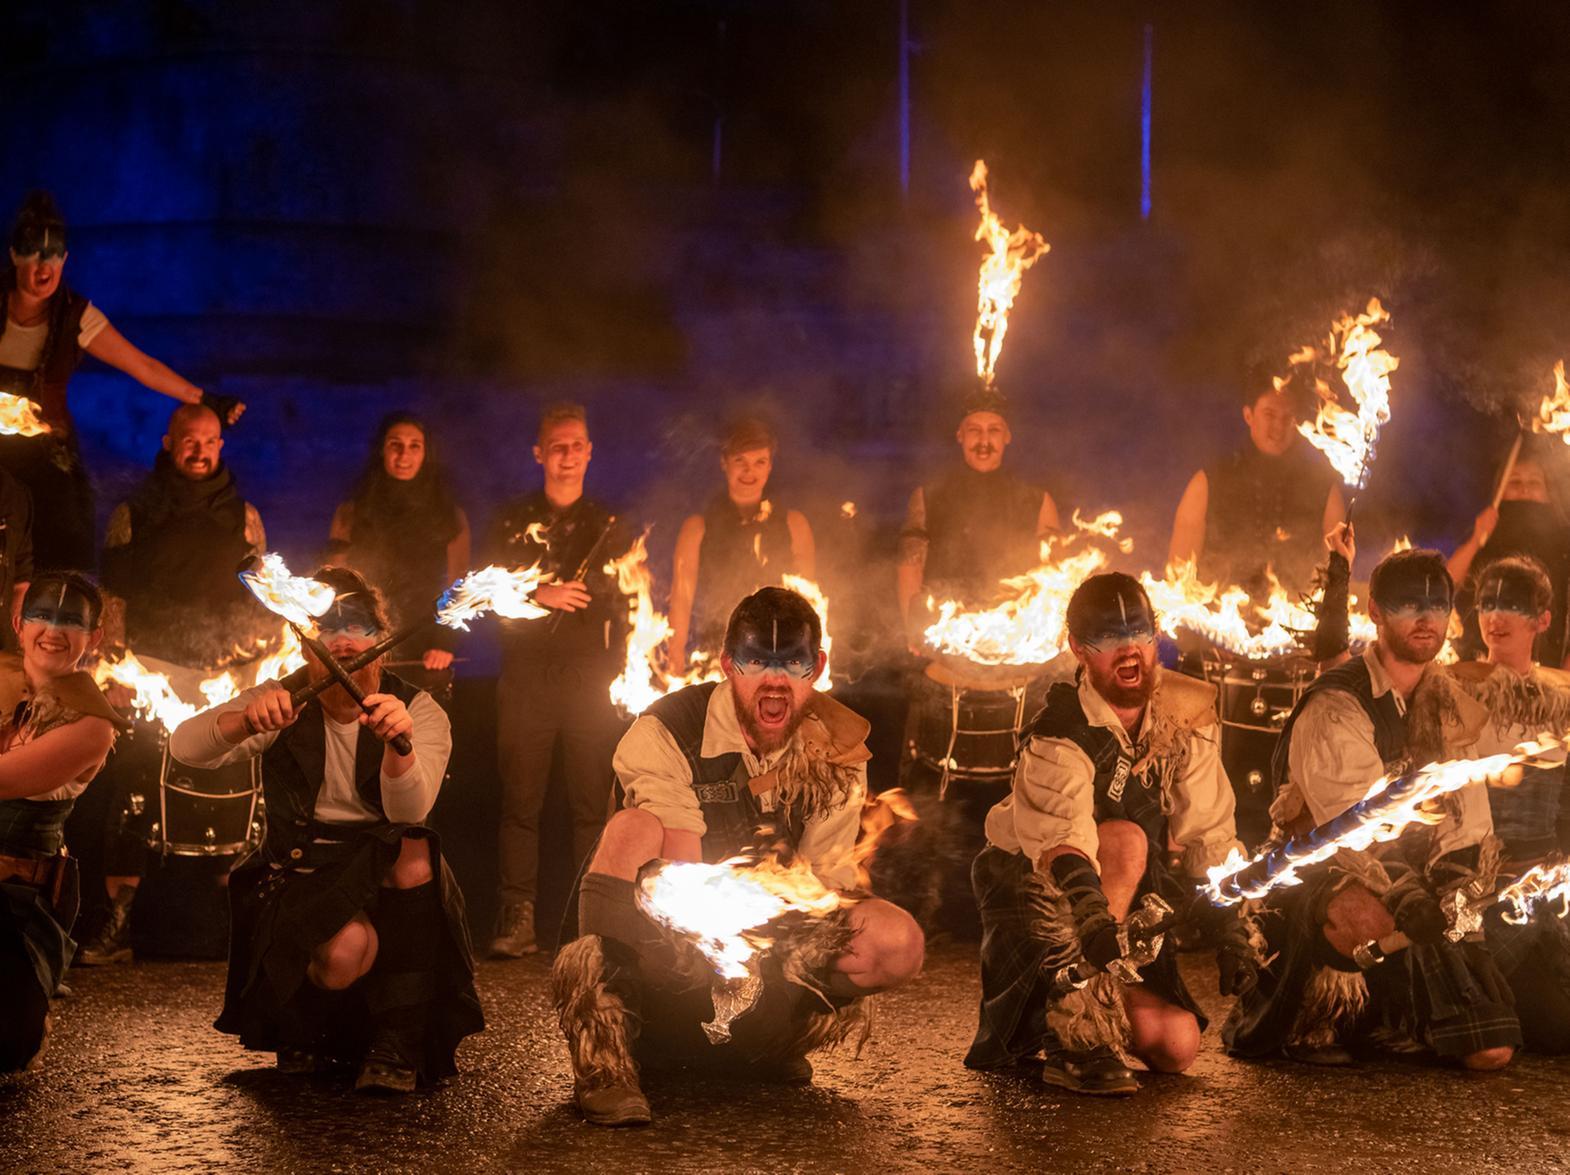 Fire-throwing artists and drummers led the 'river of light' to Holyrood Park, where event organisers say about 40,000 people gathered to create a symbol of friendship against the backdrop of the city.